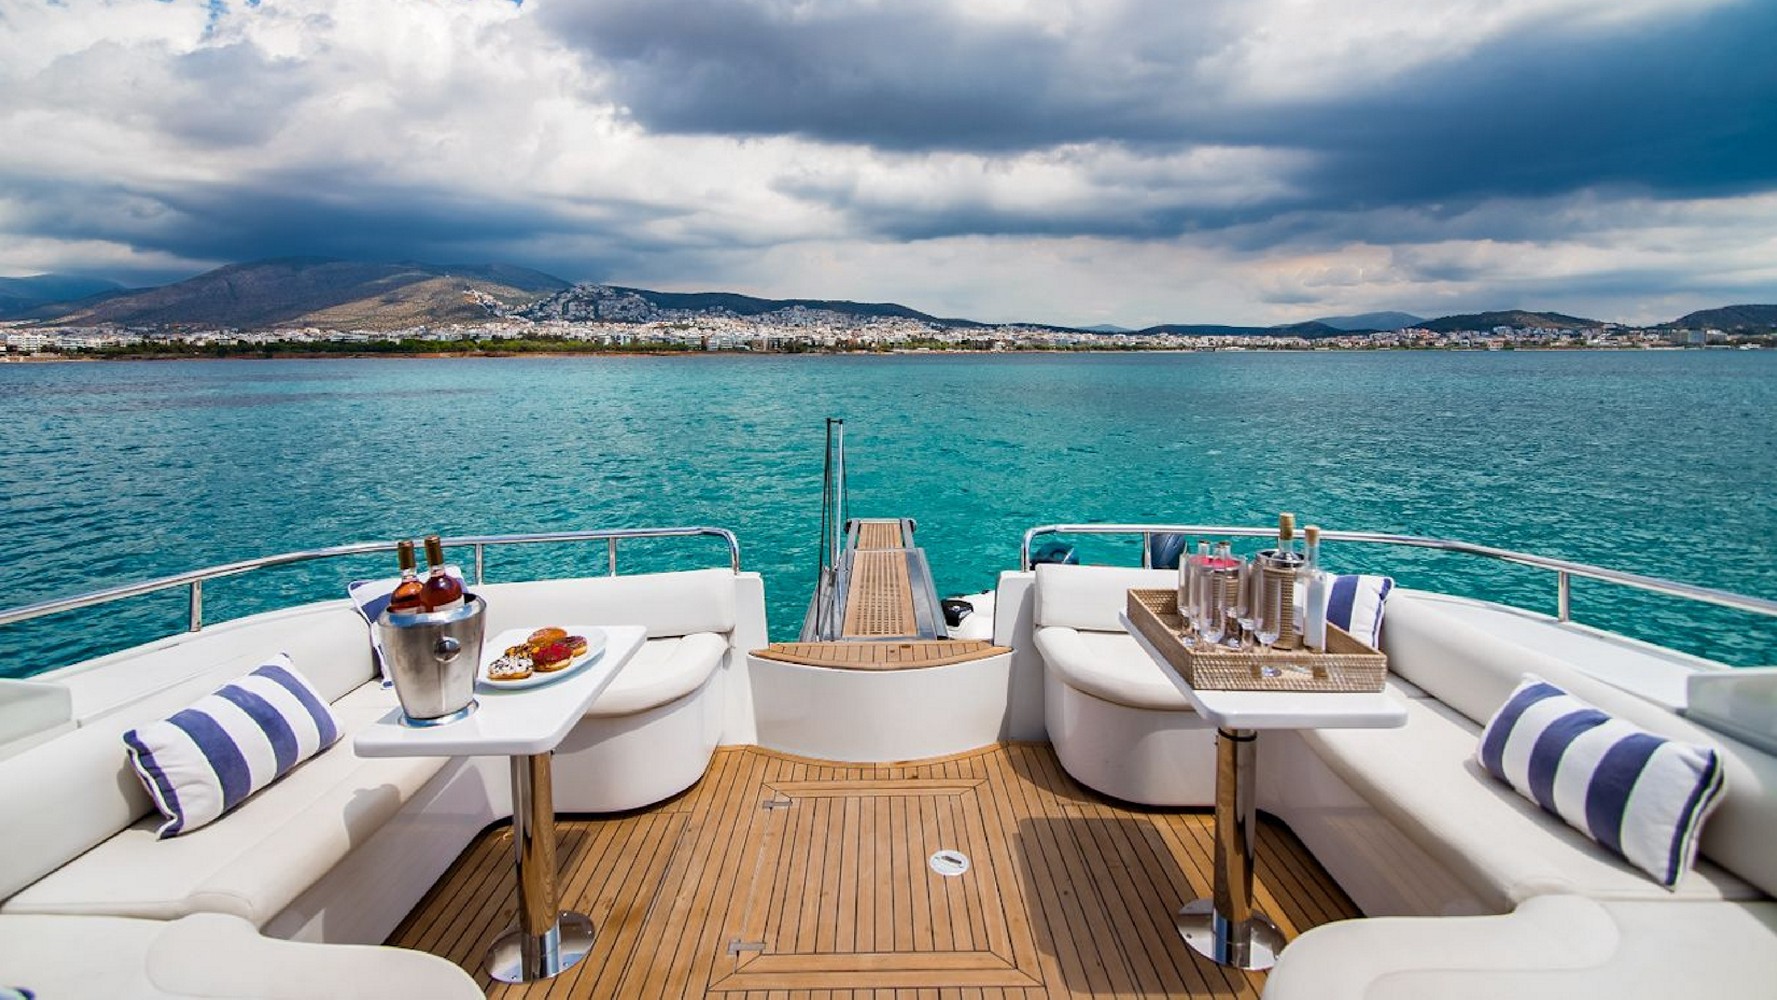 View of the sea from a yacht